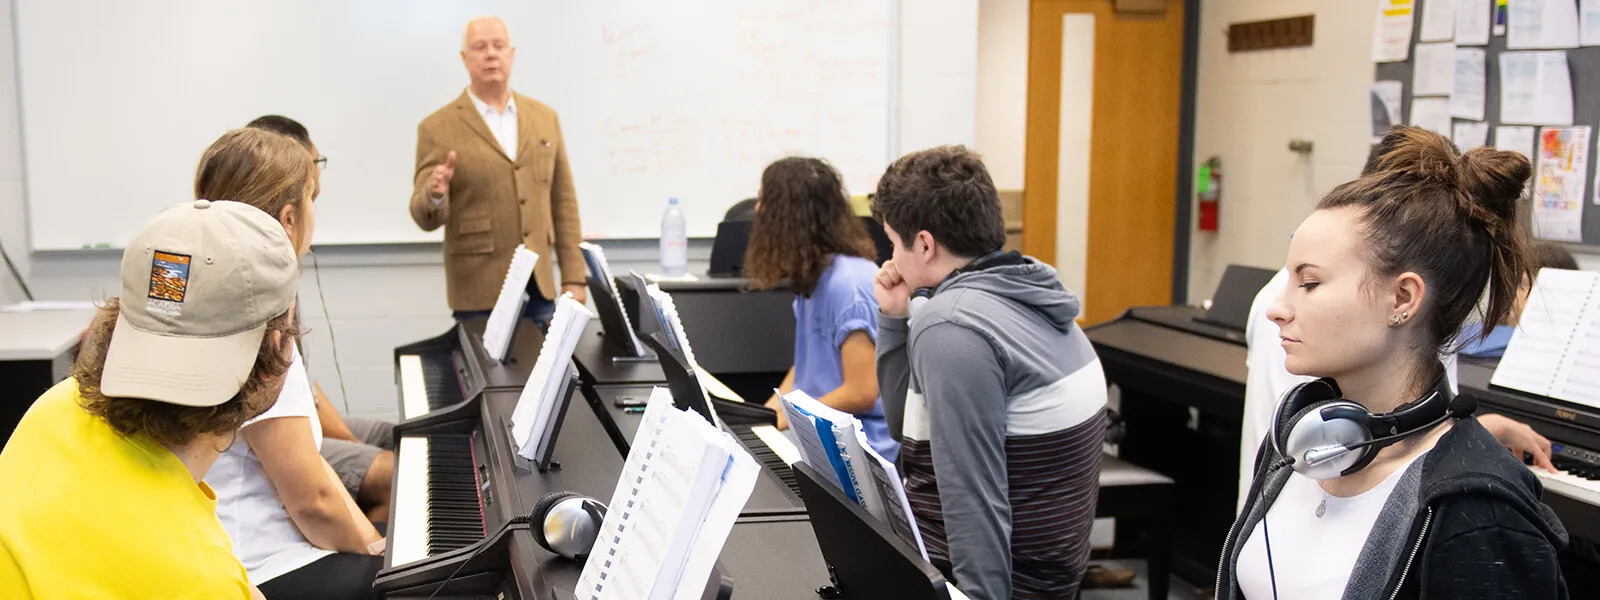 An ECC music professor instructing students seated at pianos